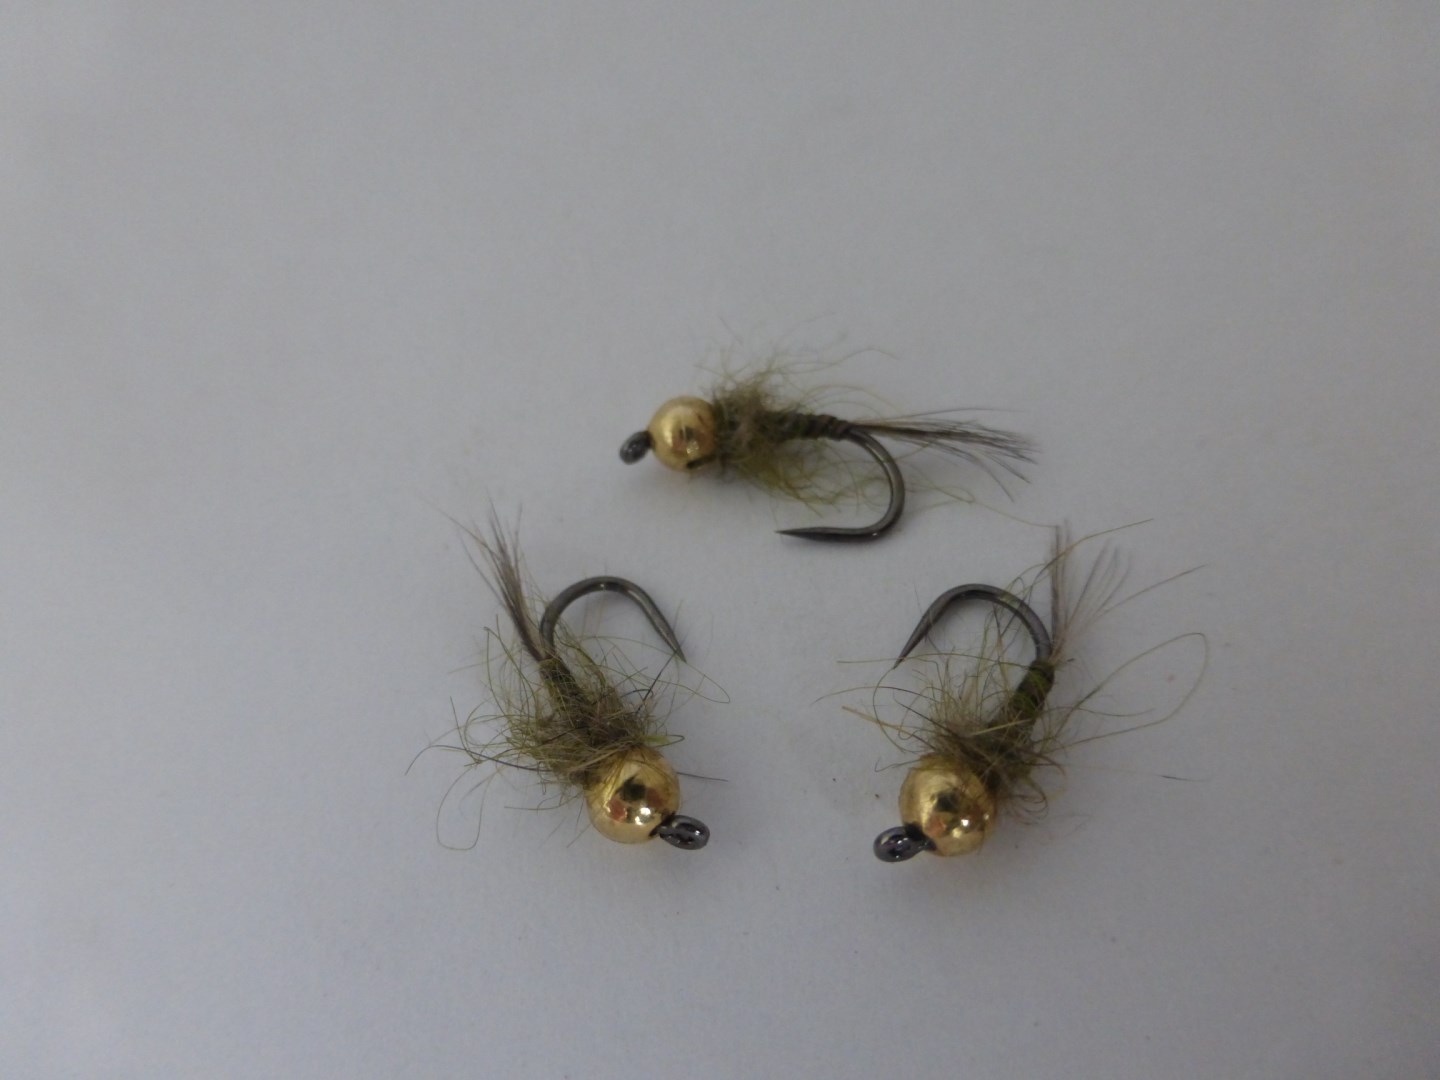 Size 16 Tungsten Quill Grayling Olive - Barbless